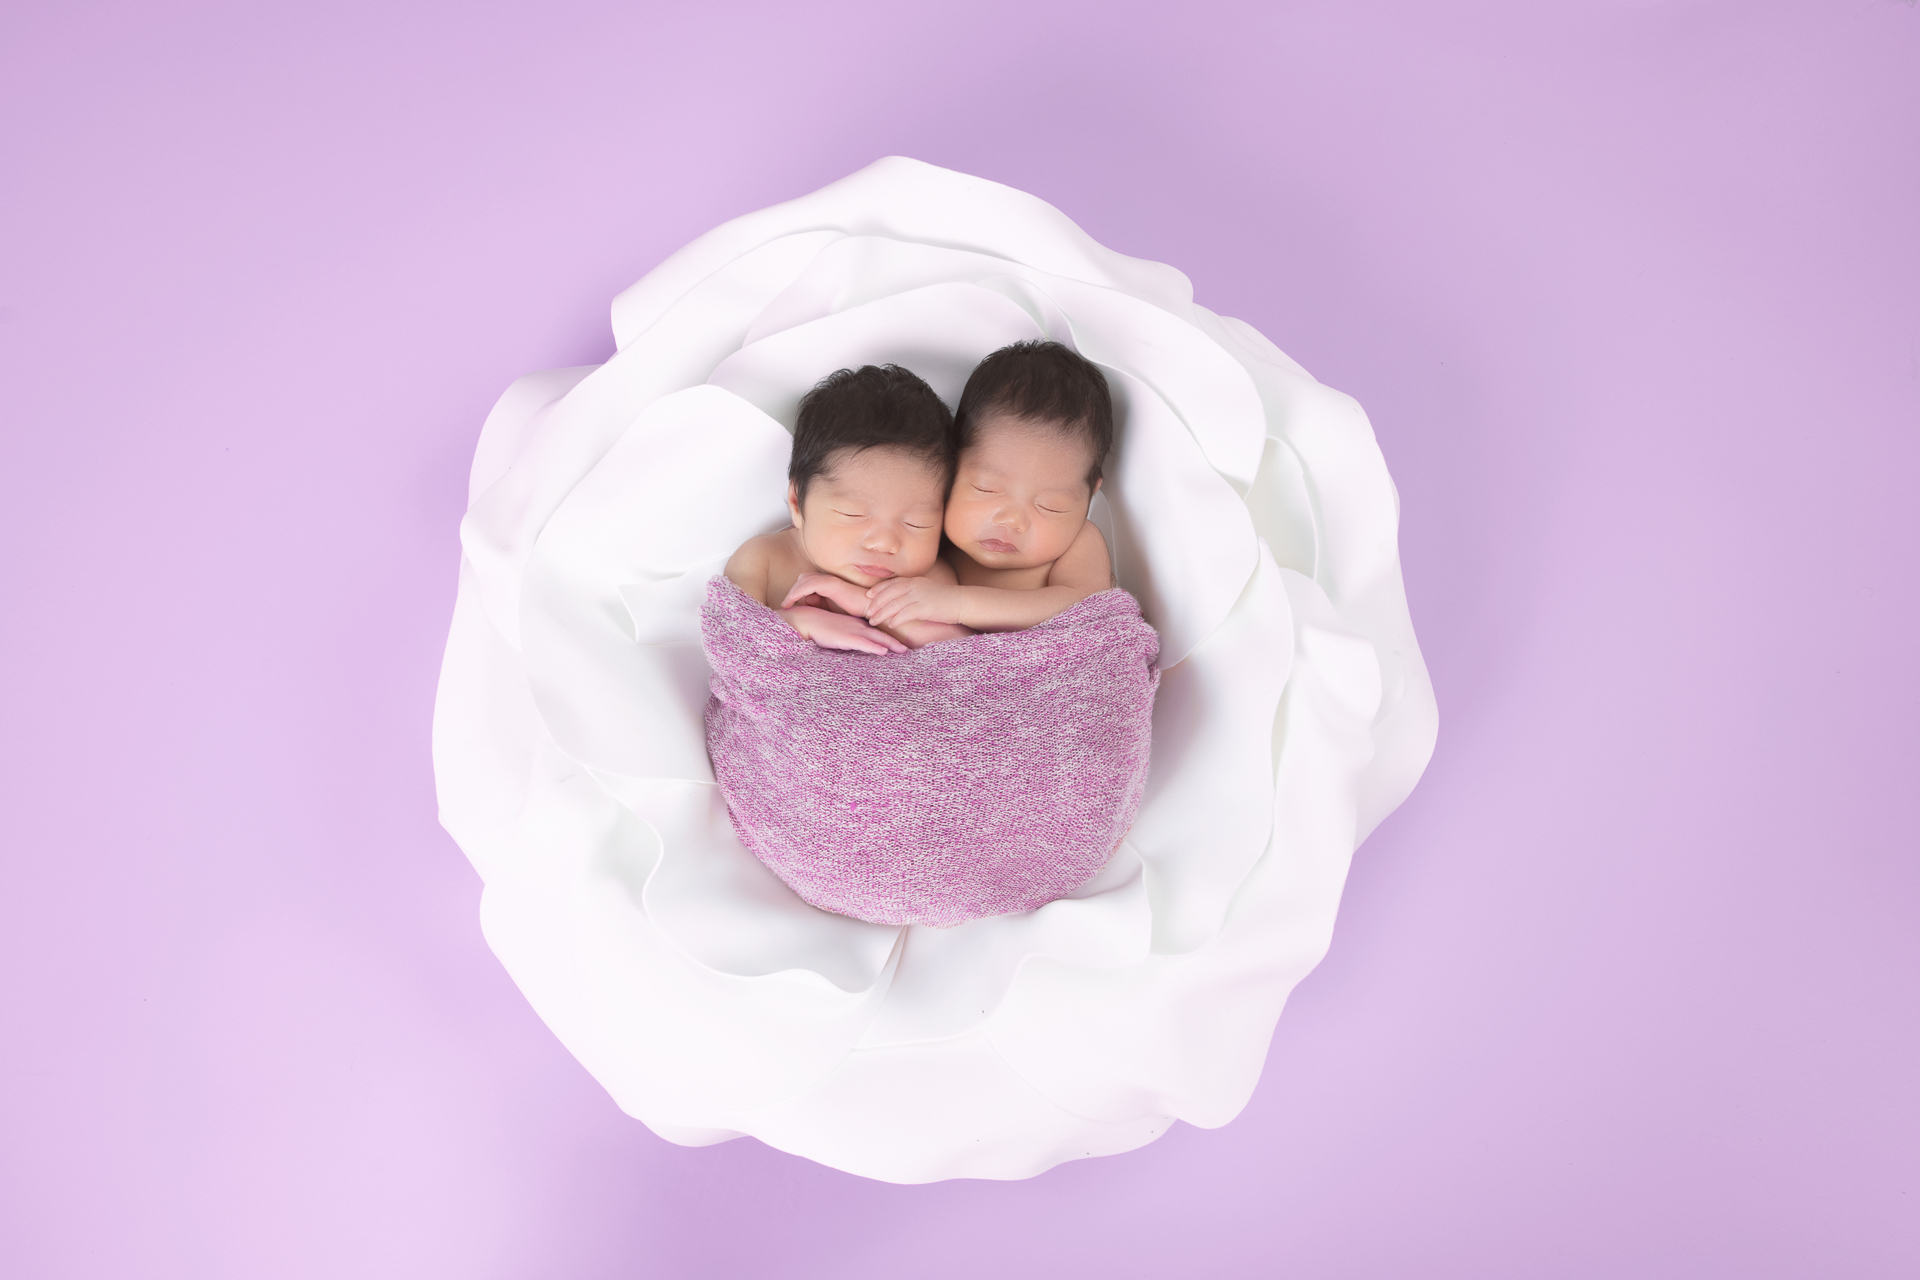 2 newborn sisters rest together on a white prop, wearing pink wrap, on a pink backdrop